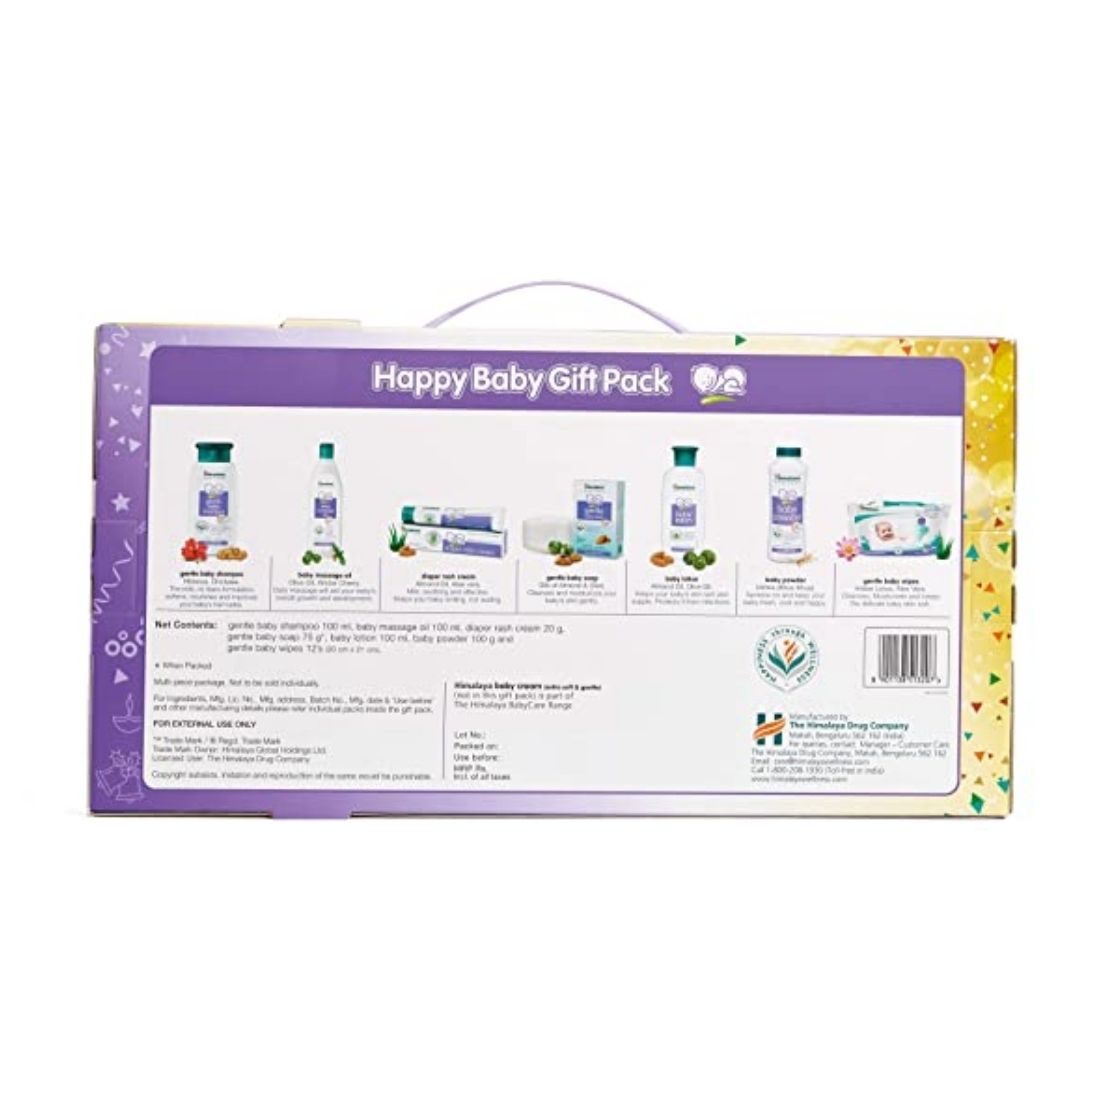 R-MART GROCERIES. himalaya-happy-baby-gift-pack-for-your-precious-baby-7n